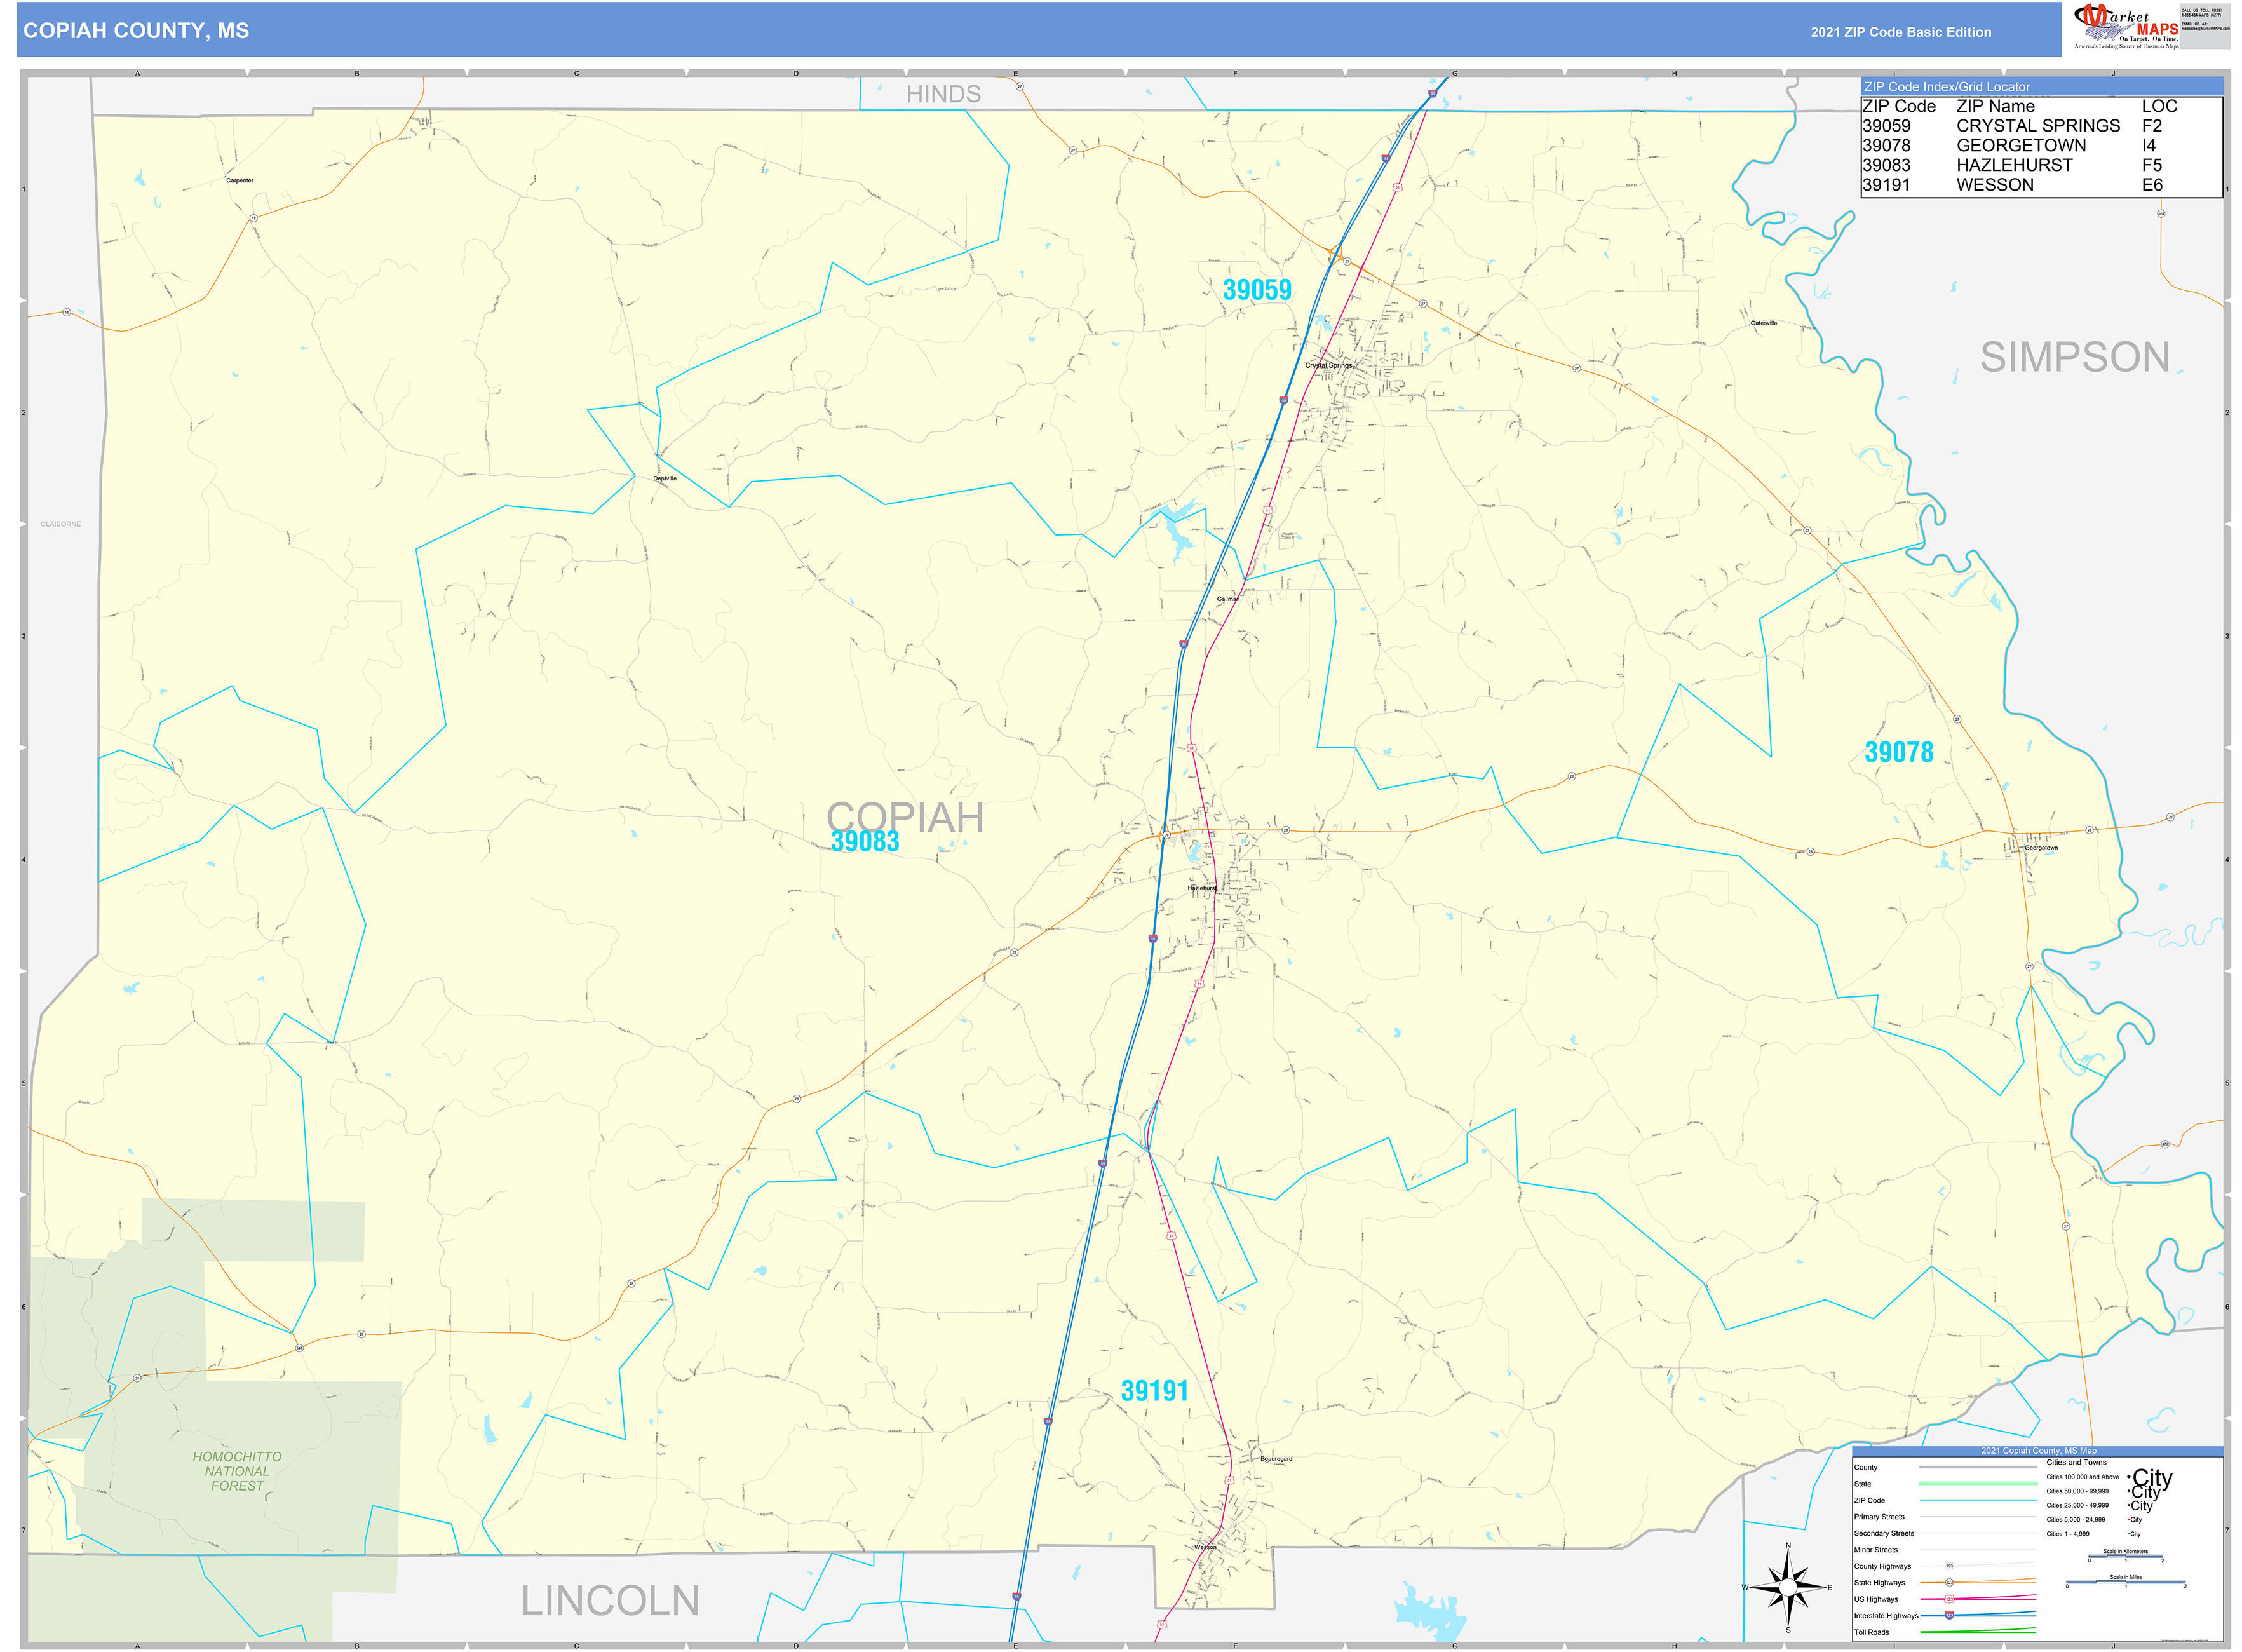 Copiah County, MS Zip Code Wall Map Basic Style by MarketMAPS